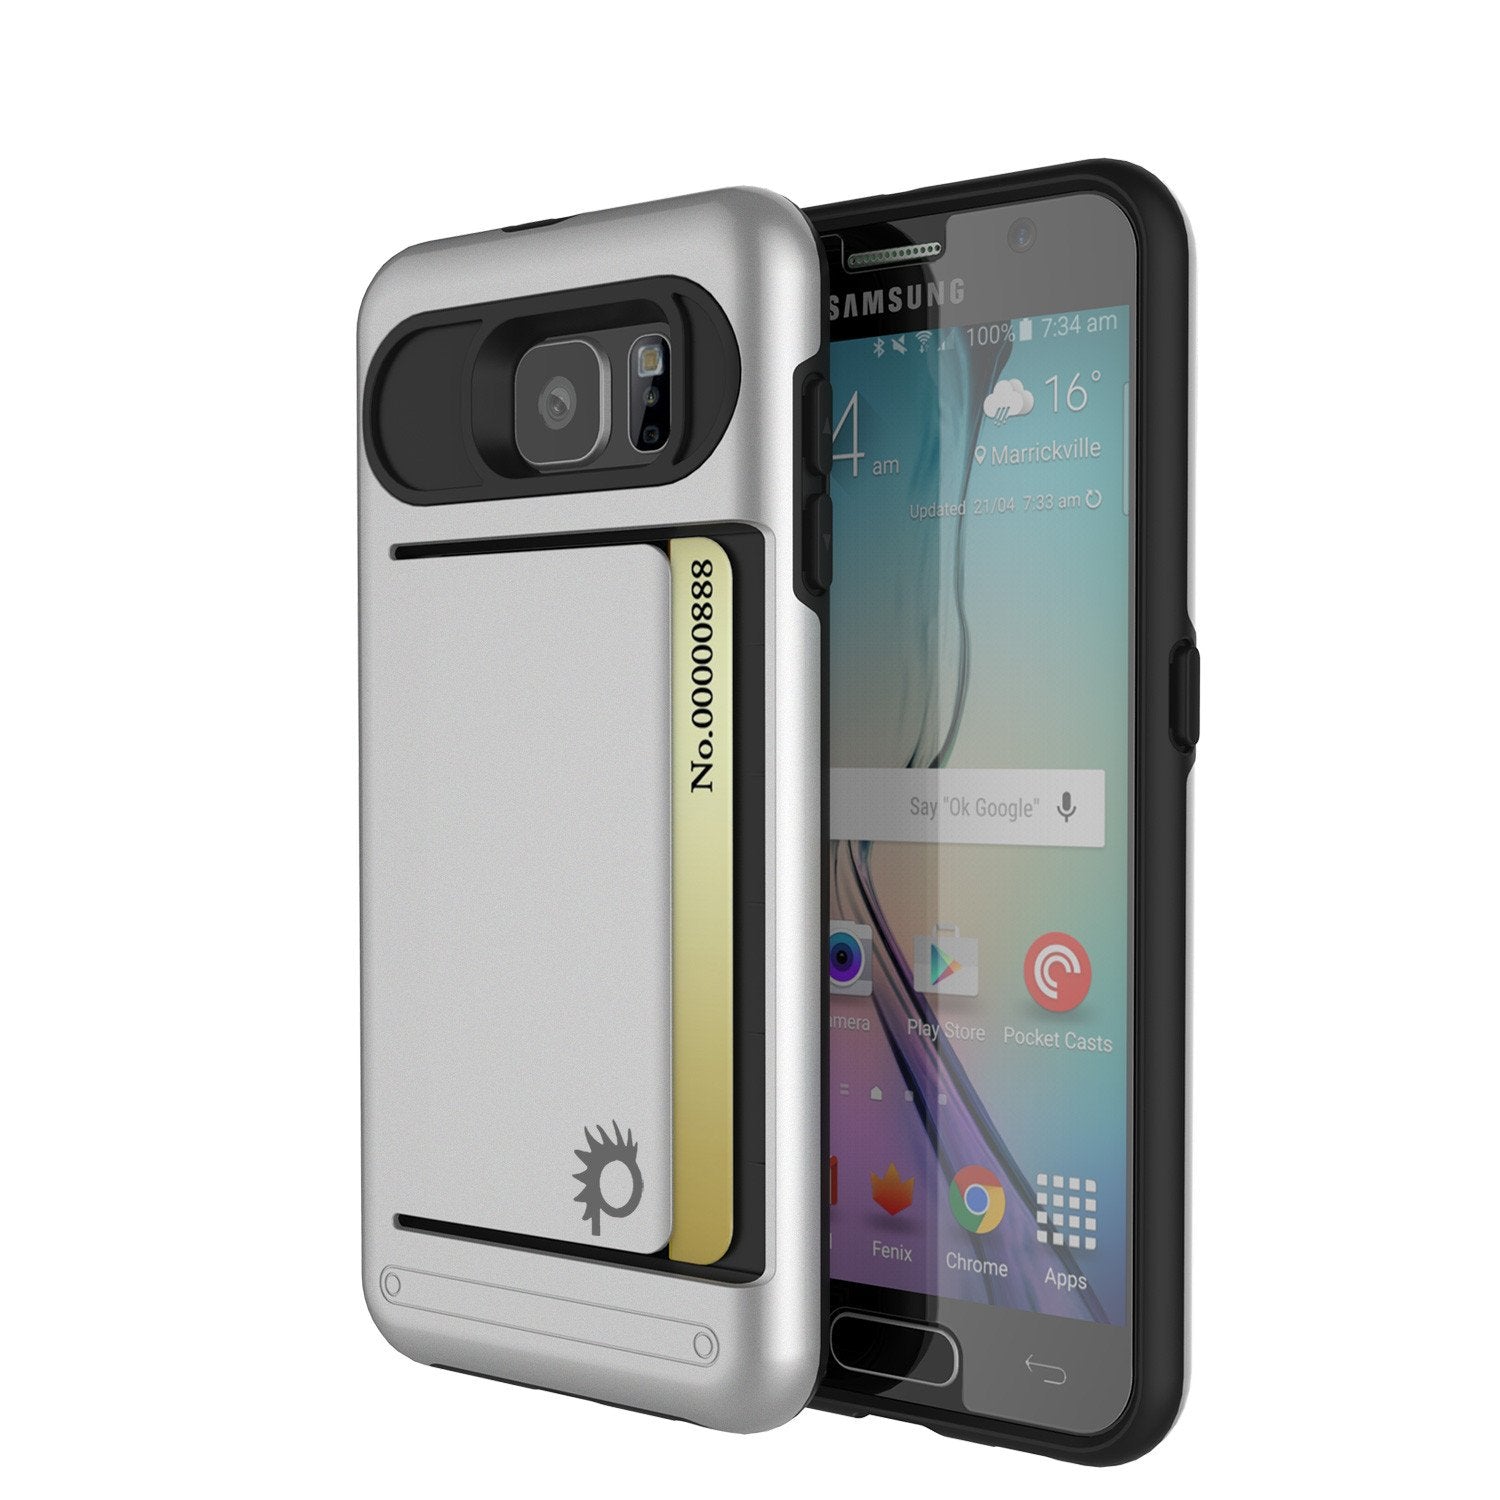 Galaxy s6 Case PunkCase CLUTCH Silver Series Slim Armor Soft Cover Case w/ Tempered Glass